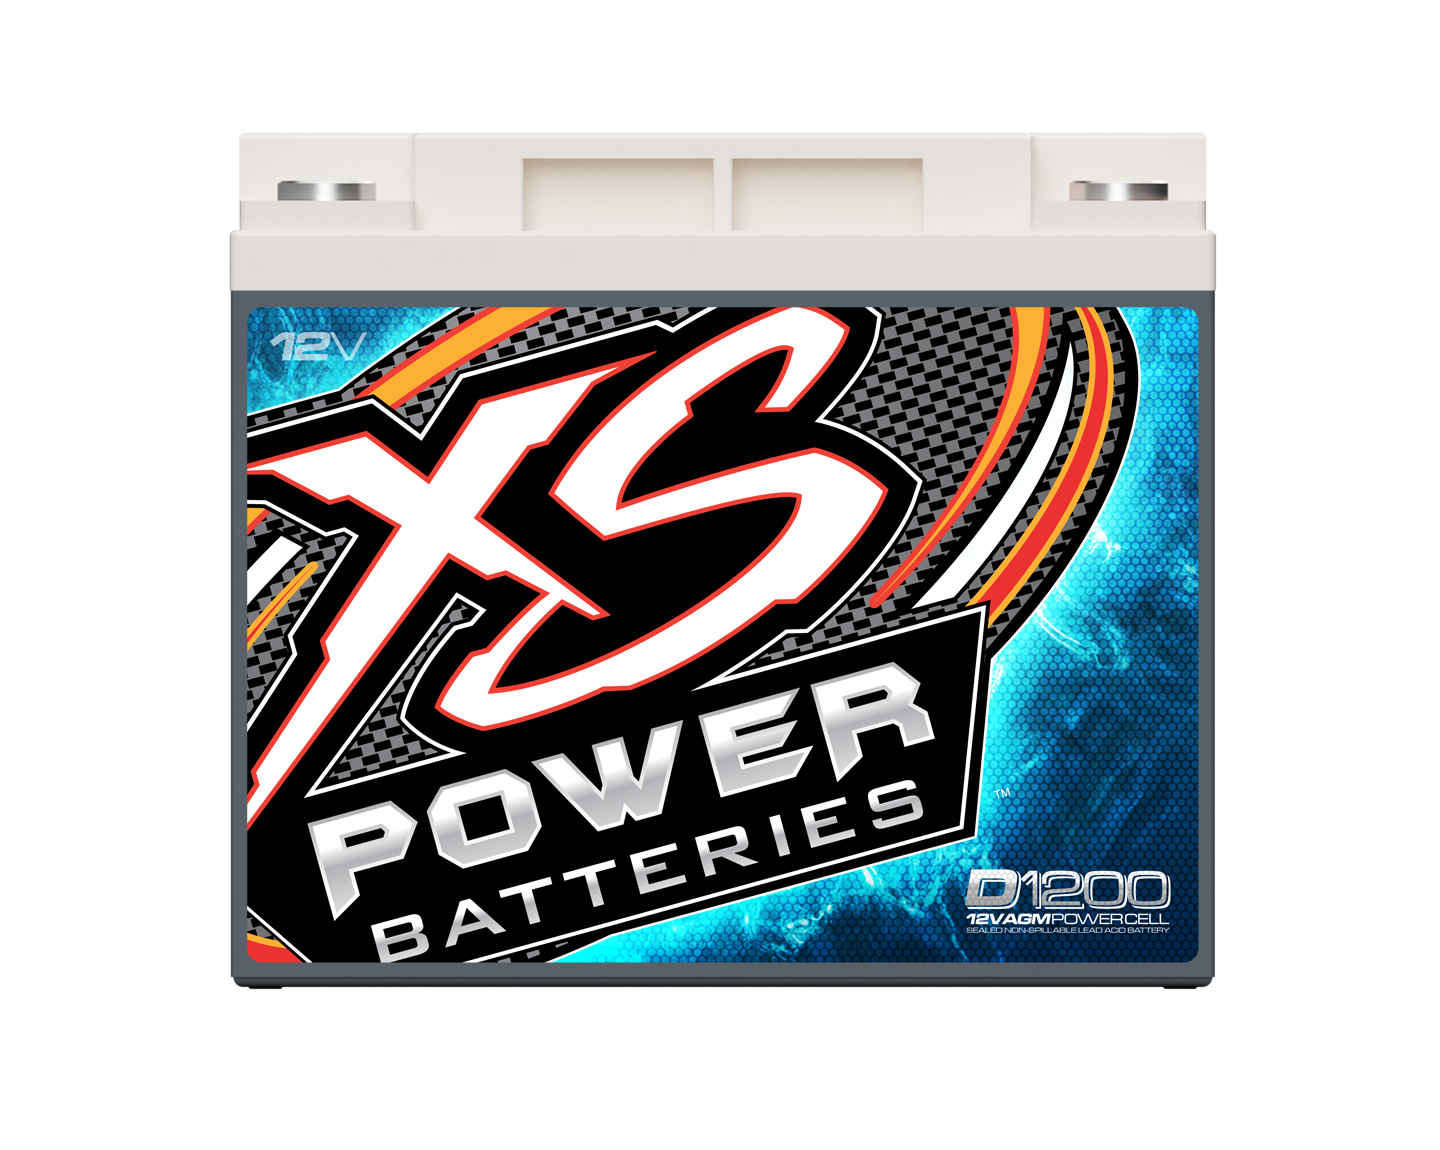 Witch battery will fit 2017 Ford Fusion 2.0